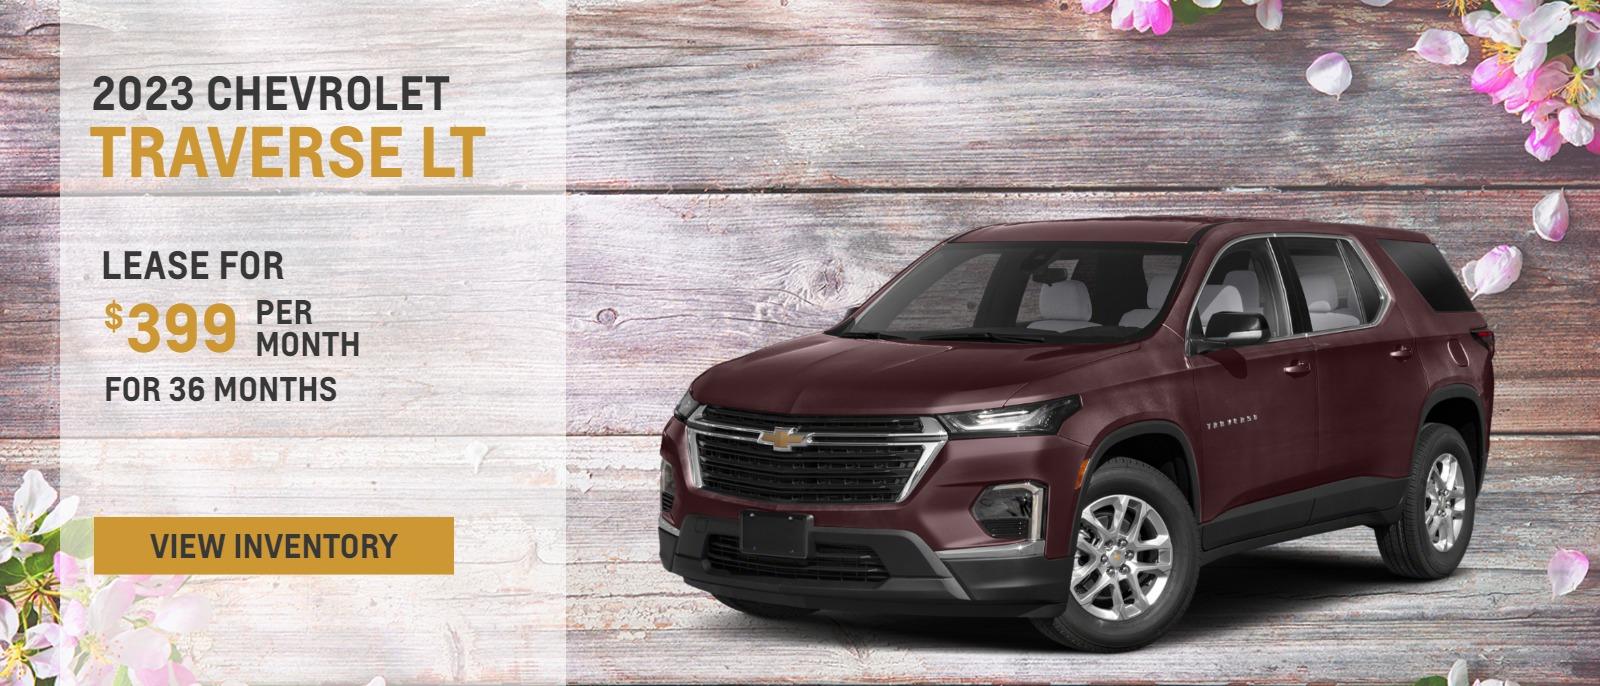 2023 Chevrolet Traverse LT
Lease for $399 per mo. 36 mos.